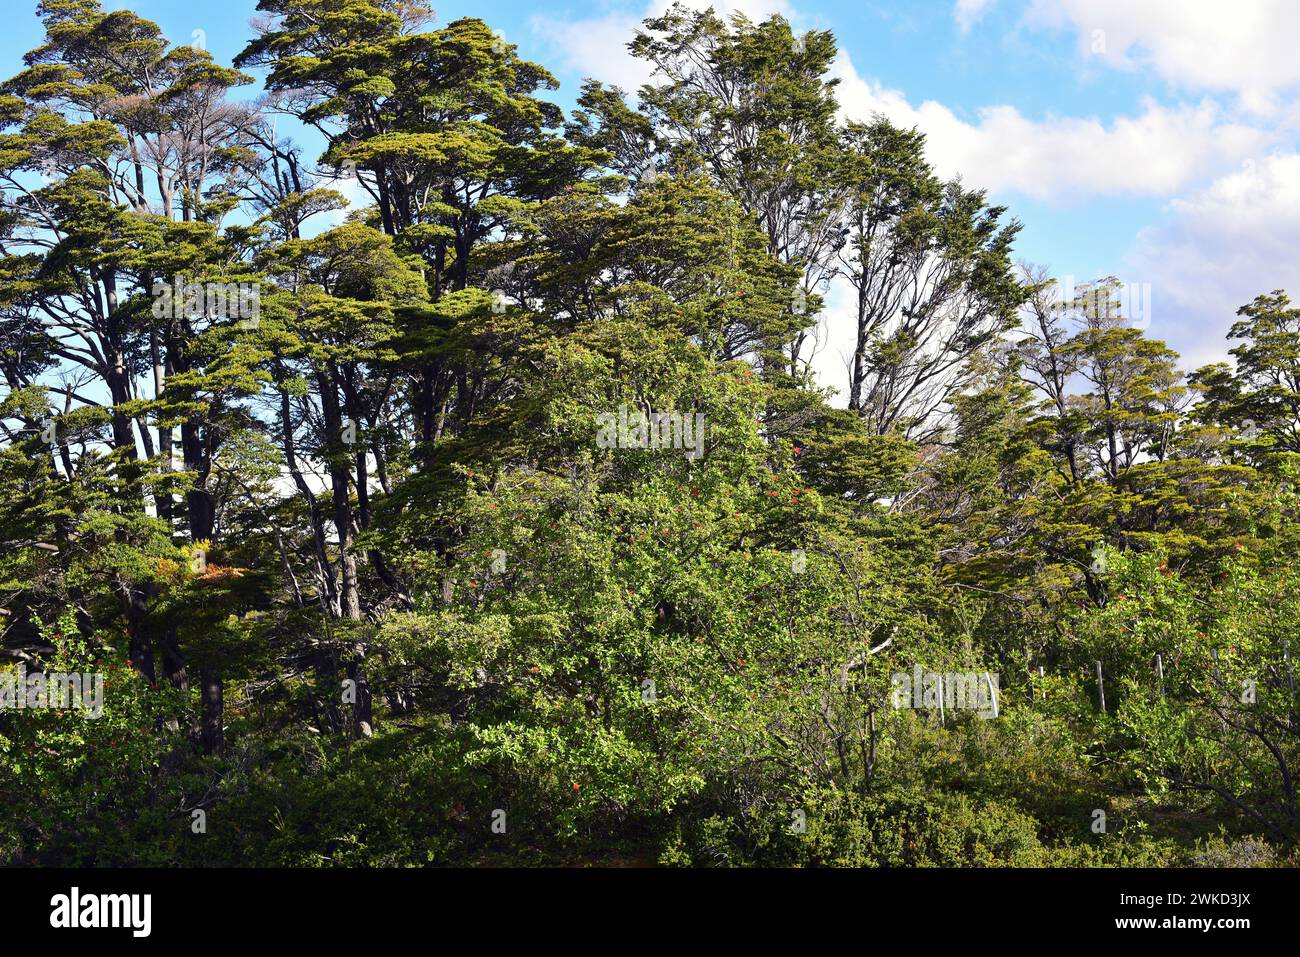 Coihue or coigüe de Magallanes or Magellan's beech (Nothofagus betuloides) is an evergreen tree endemic to central and southern Chile and Argentina An Stock Photo